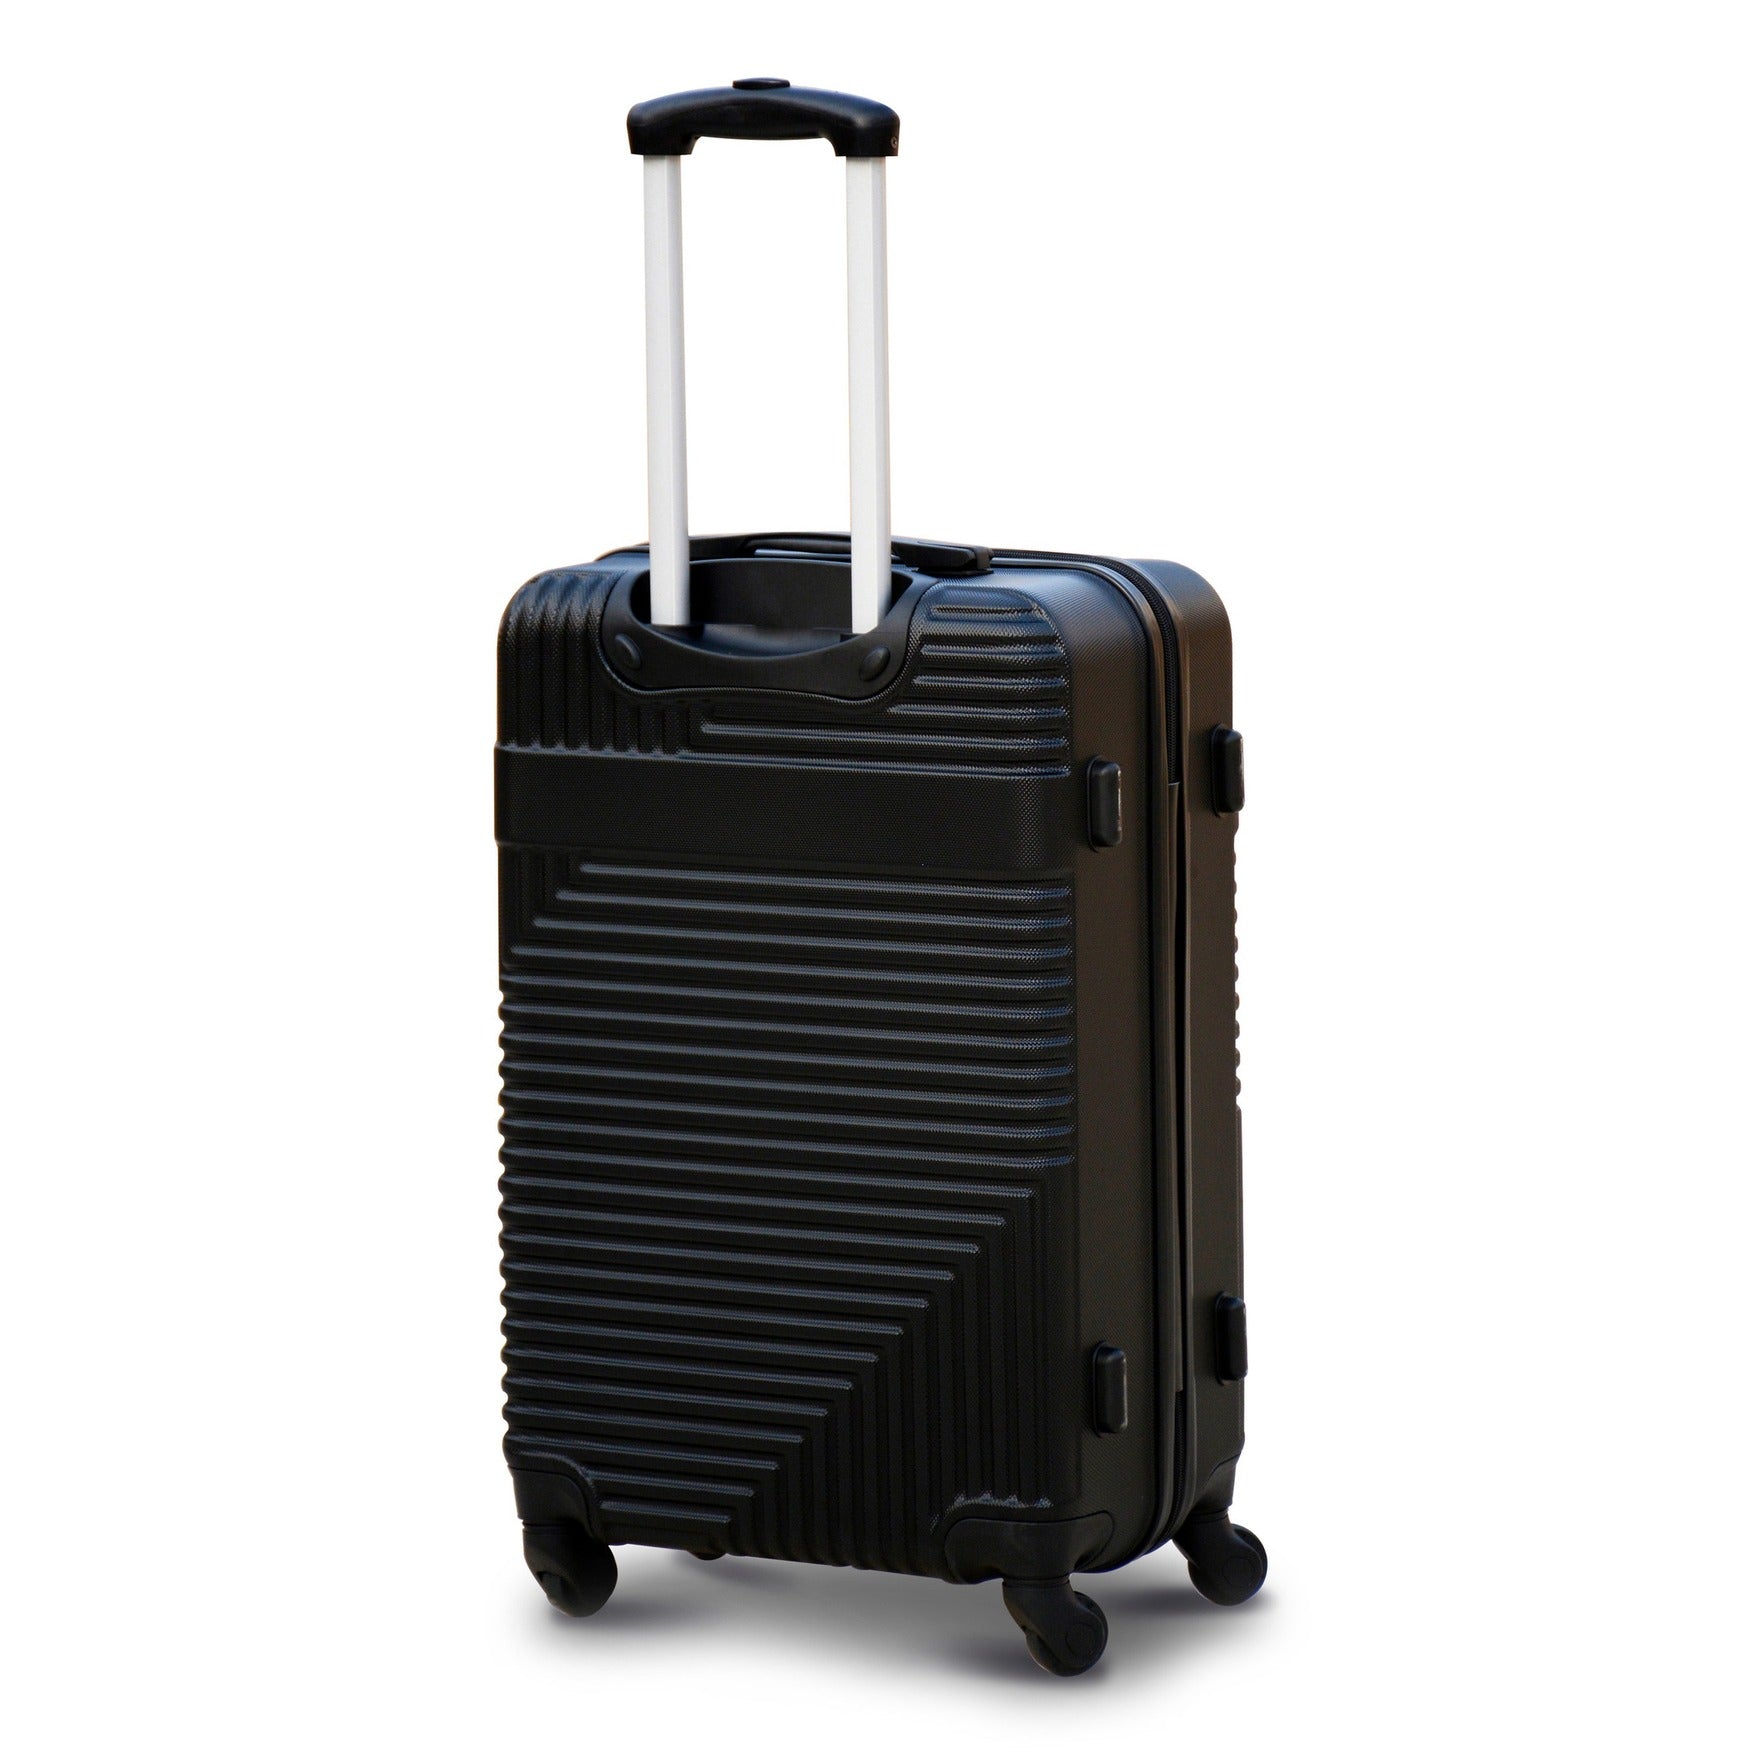 32" Black Colour Travel Way ABS Luggage Lightweight Hard Case Trolley Bag with Spinner Wheel